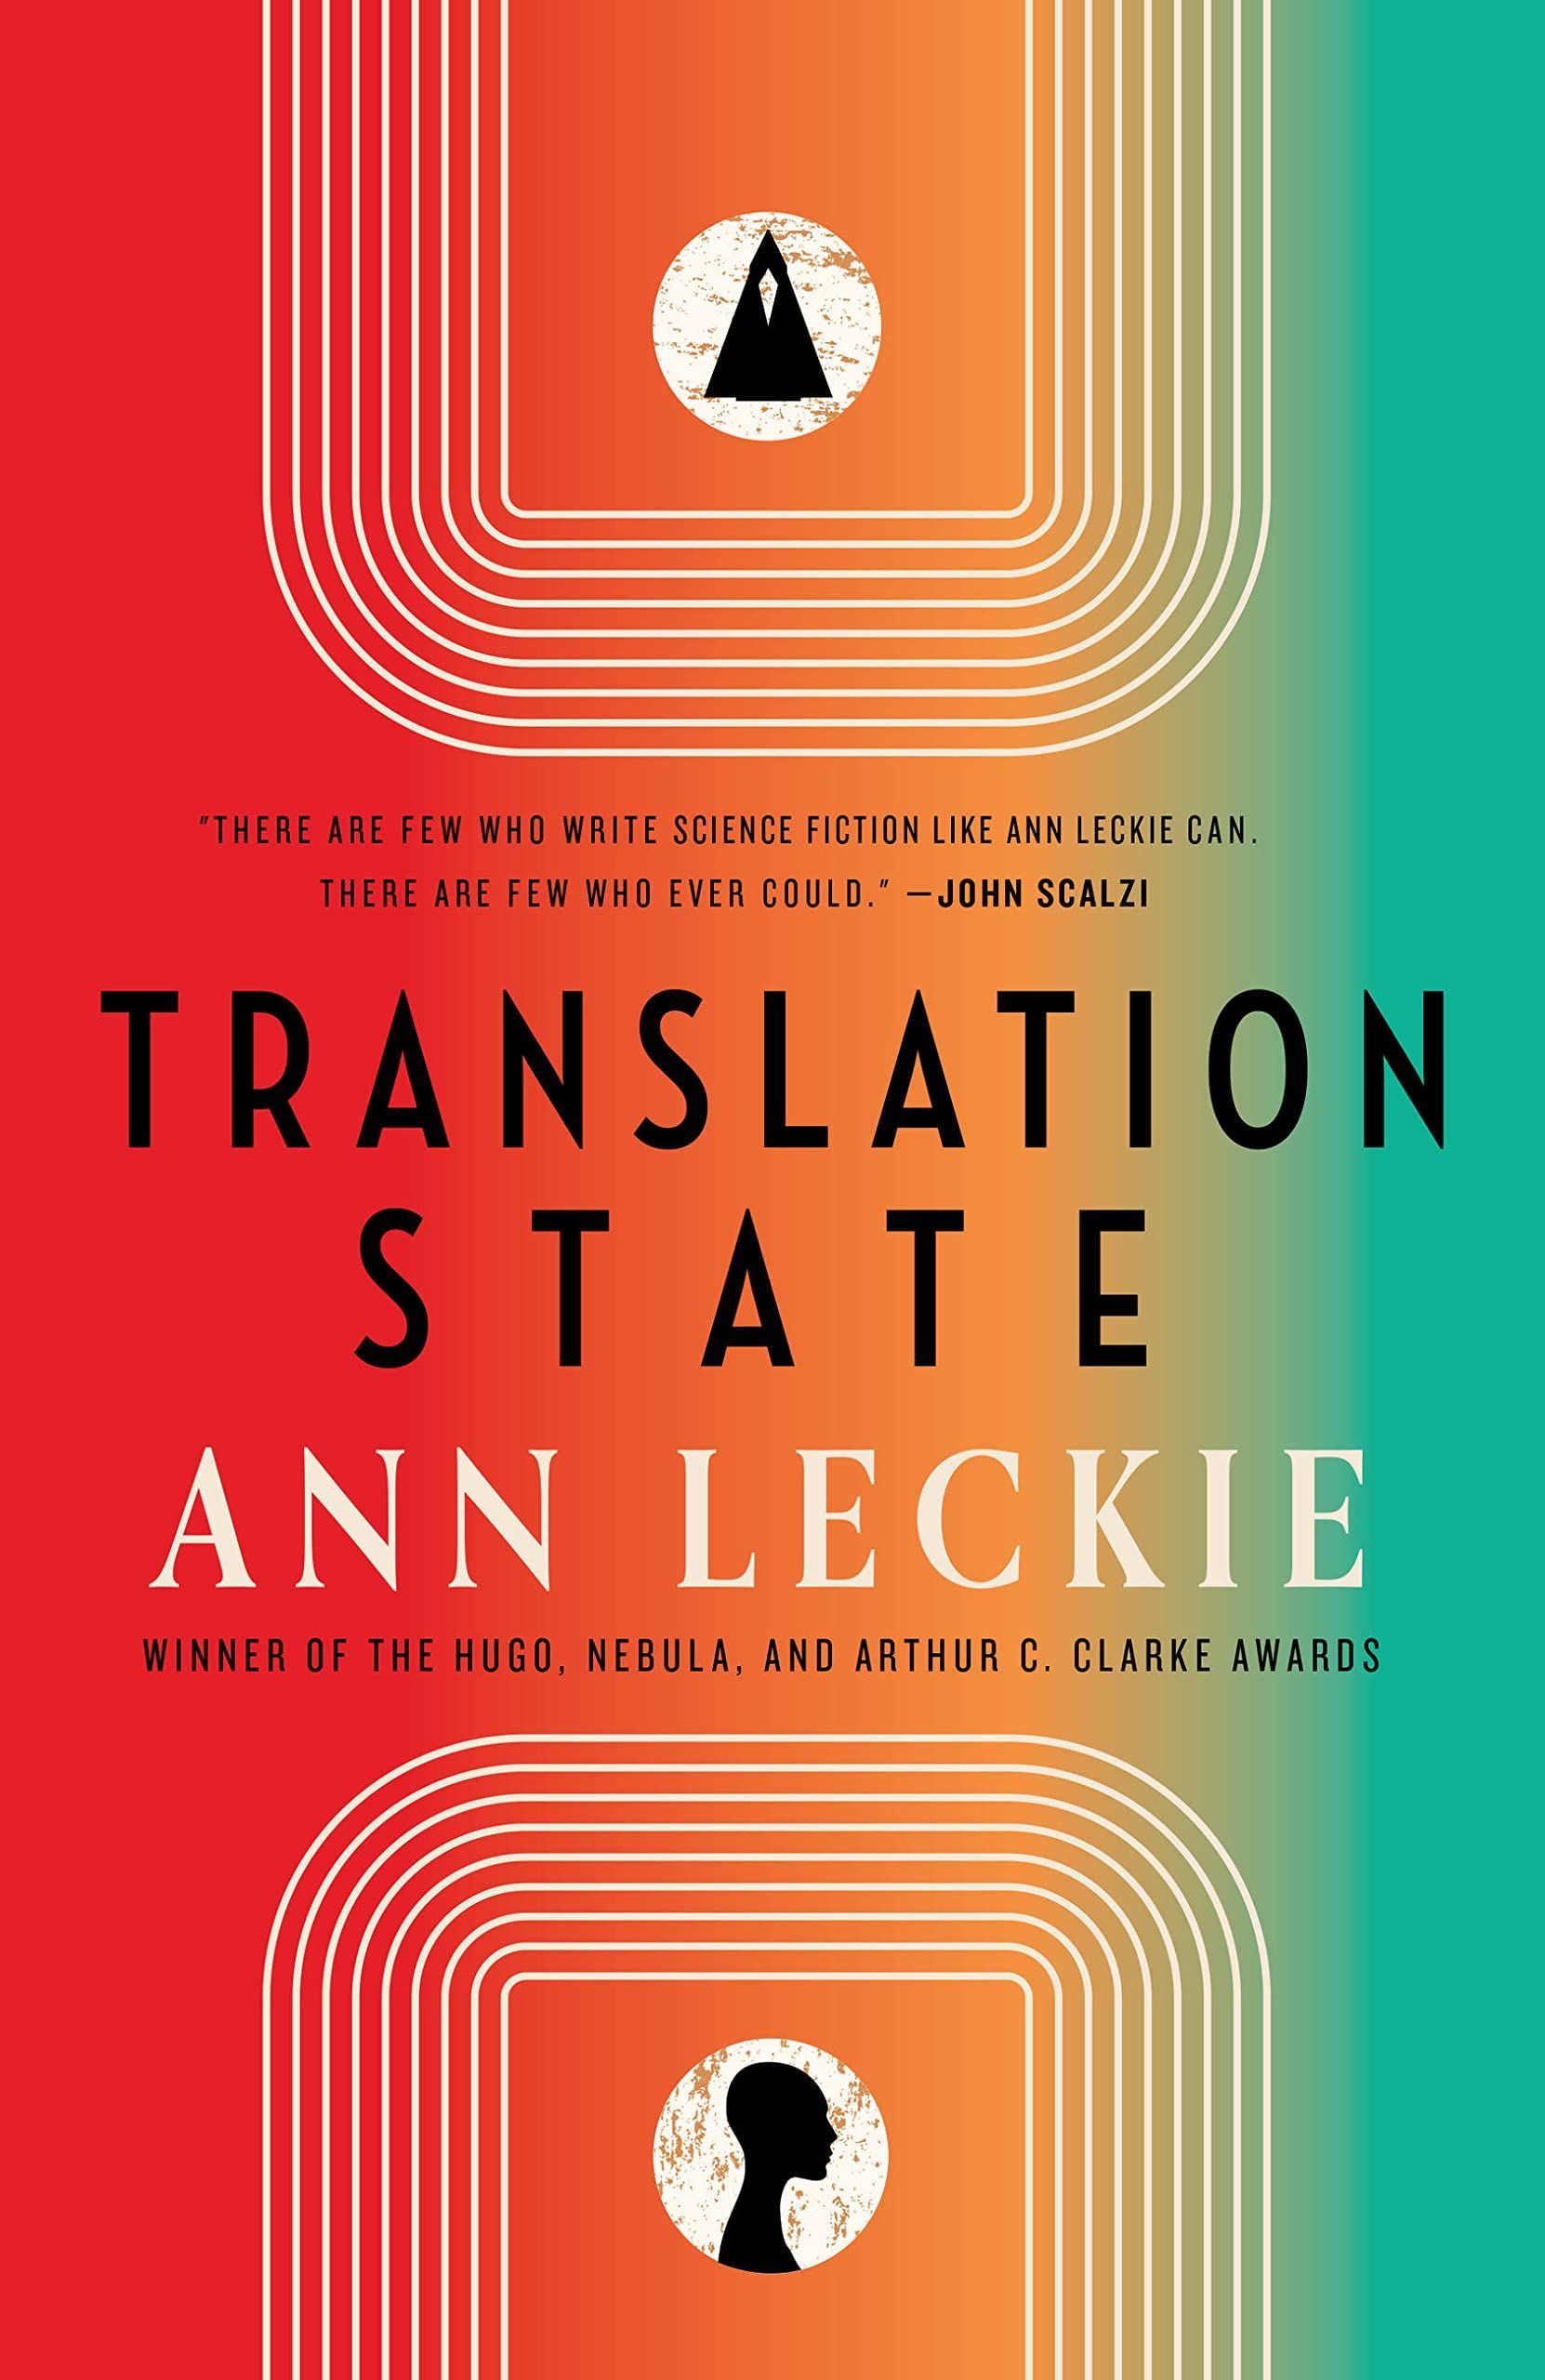 Your Genes Aren’t Your Destiny: On Ann Leckie’s “Translation State”